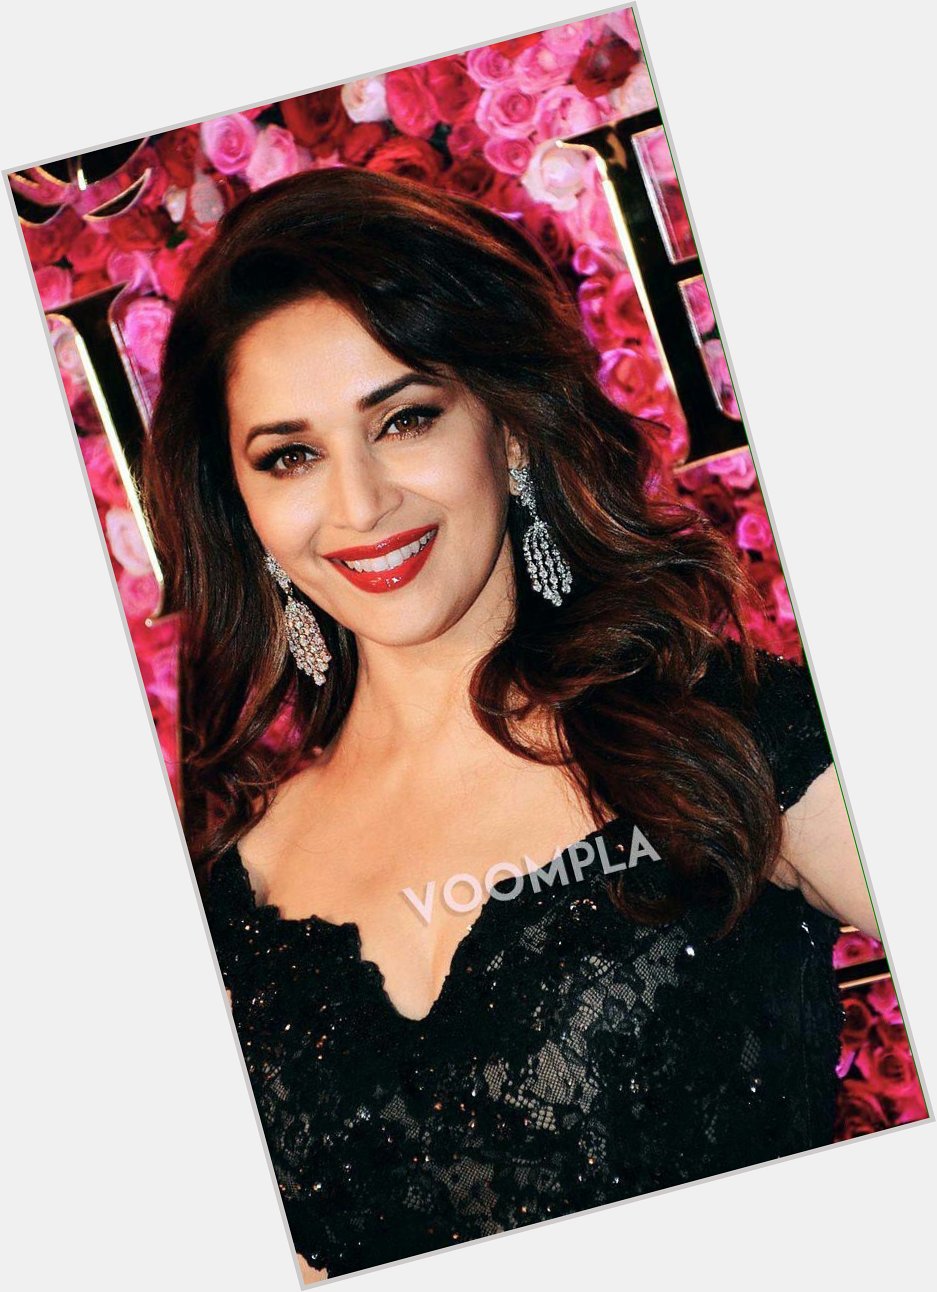 Wishing you A very.. HAPPY BIRTHDAY MADHURI DIXIT mam      BEAUTY QUEEN  